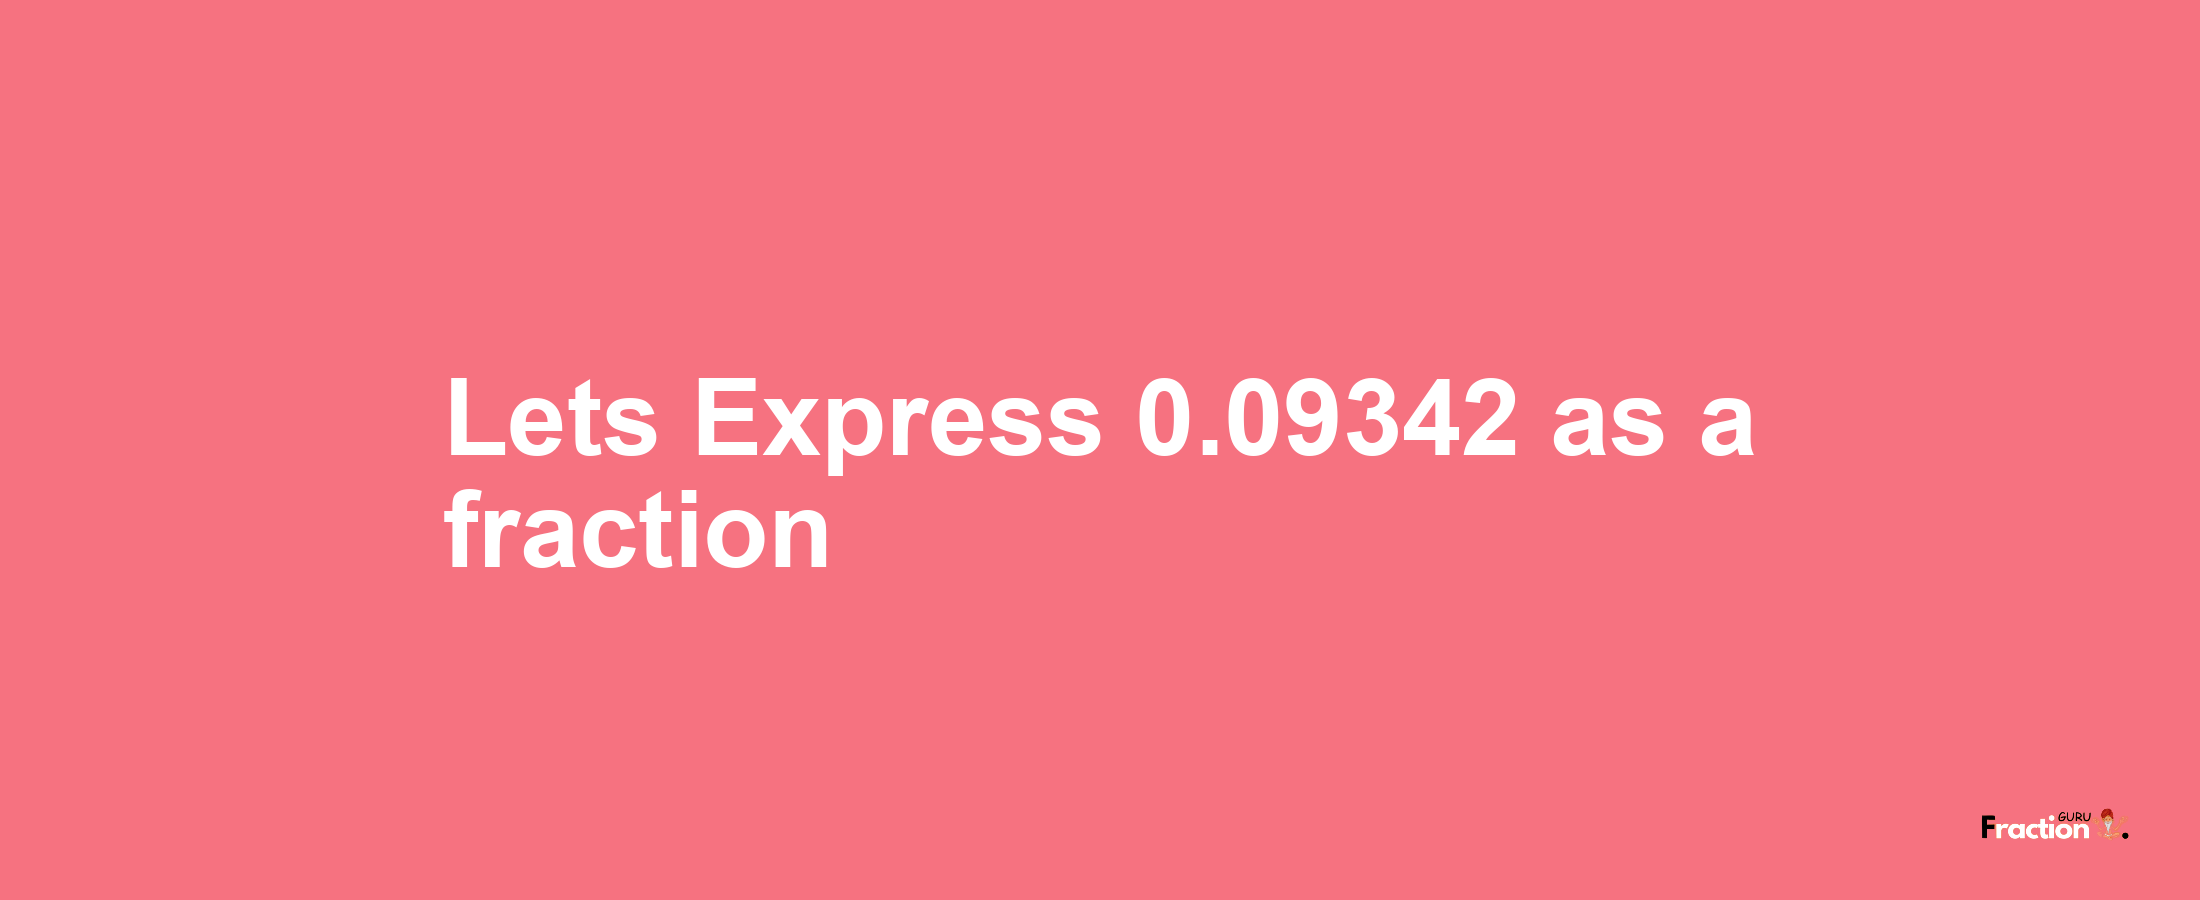 Lets Express 0.09342 as afraction